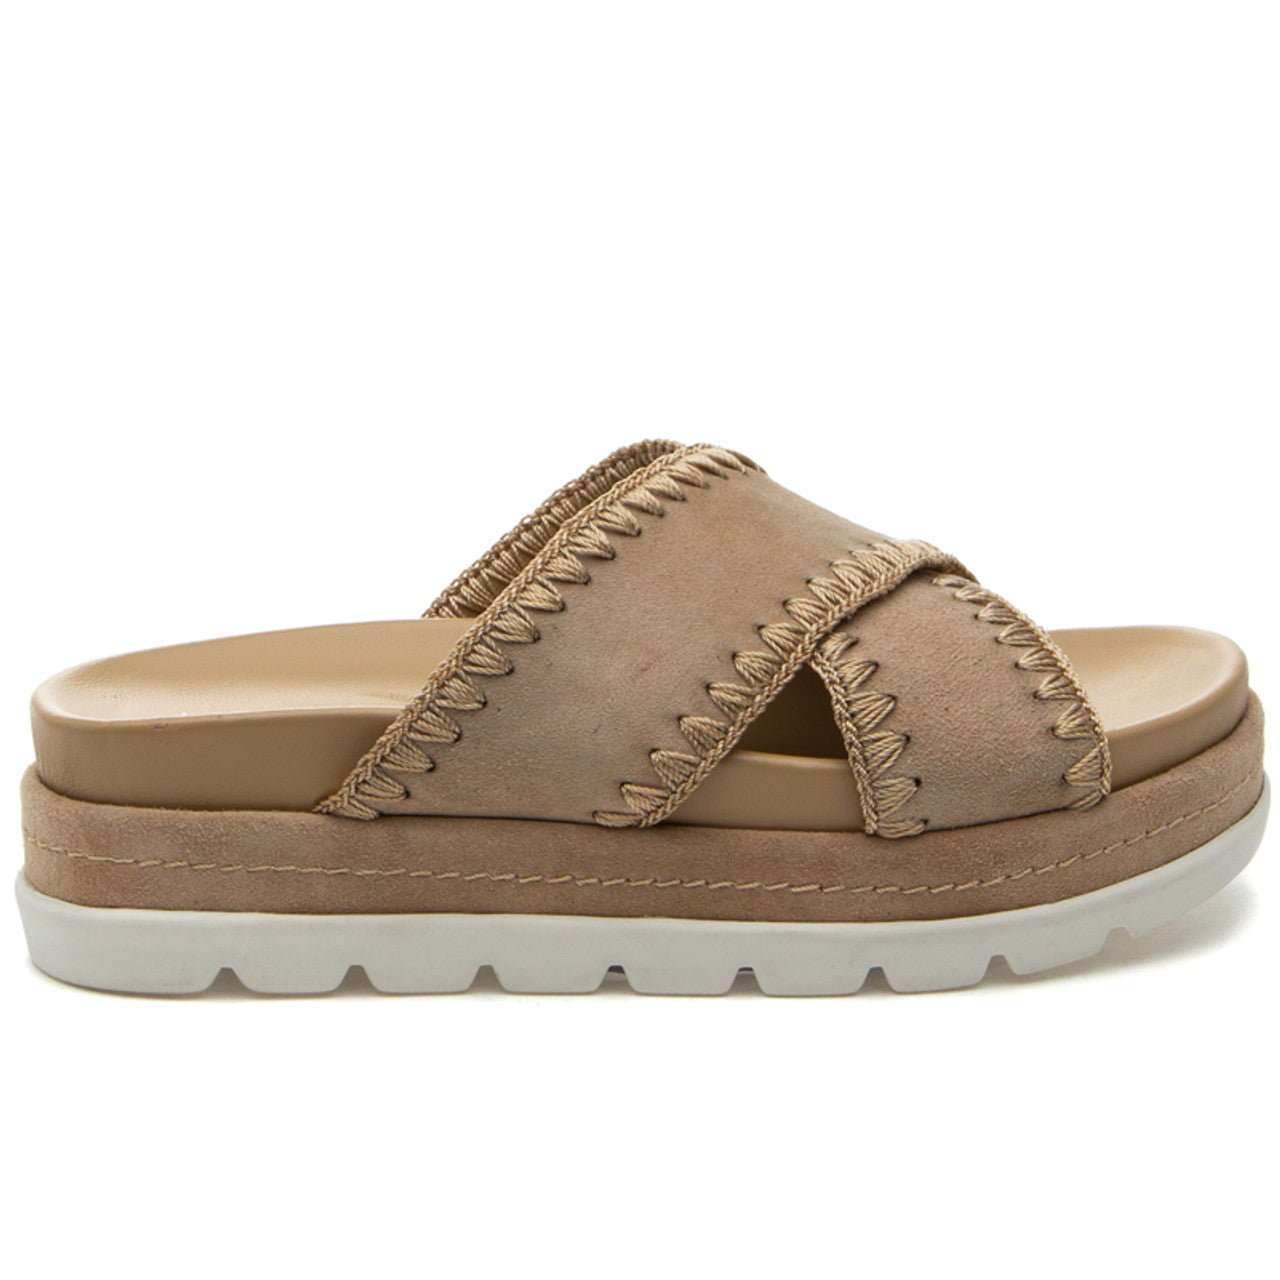 J Slides - Boo in Sand Suede